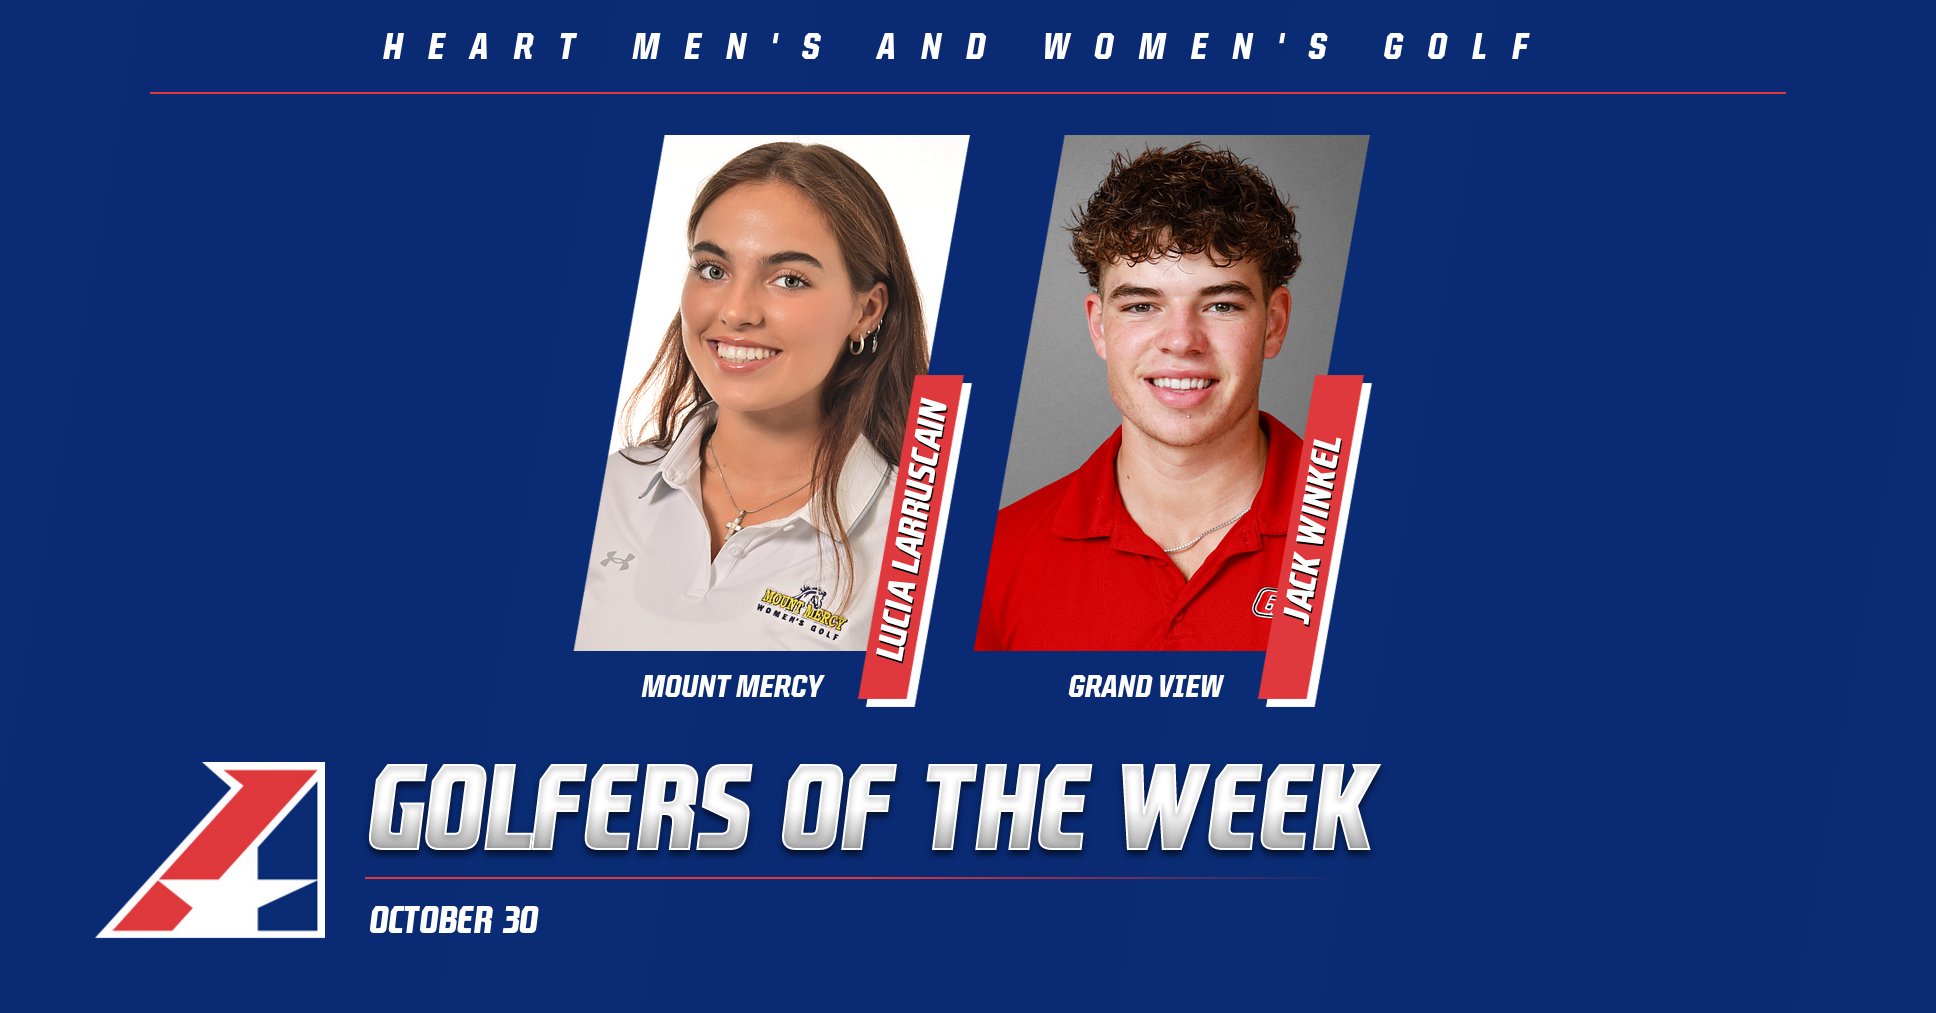 Final Heart Golfer of the Week Awards of the Fall Season Announced